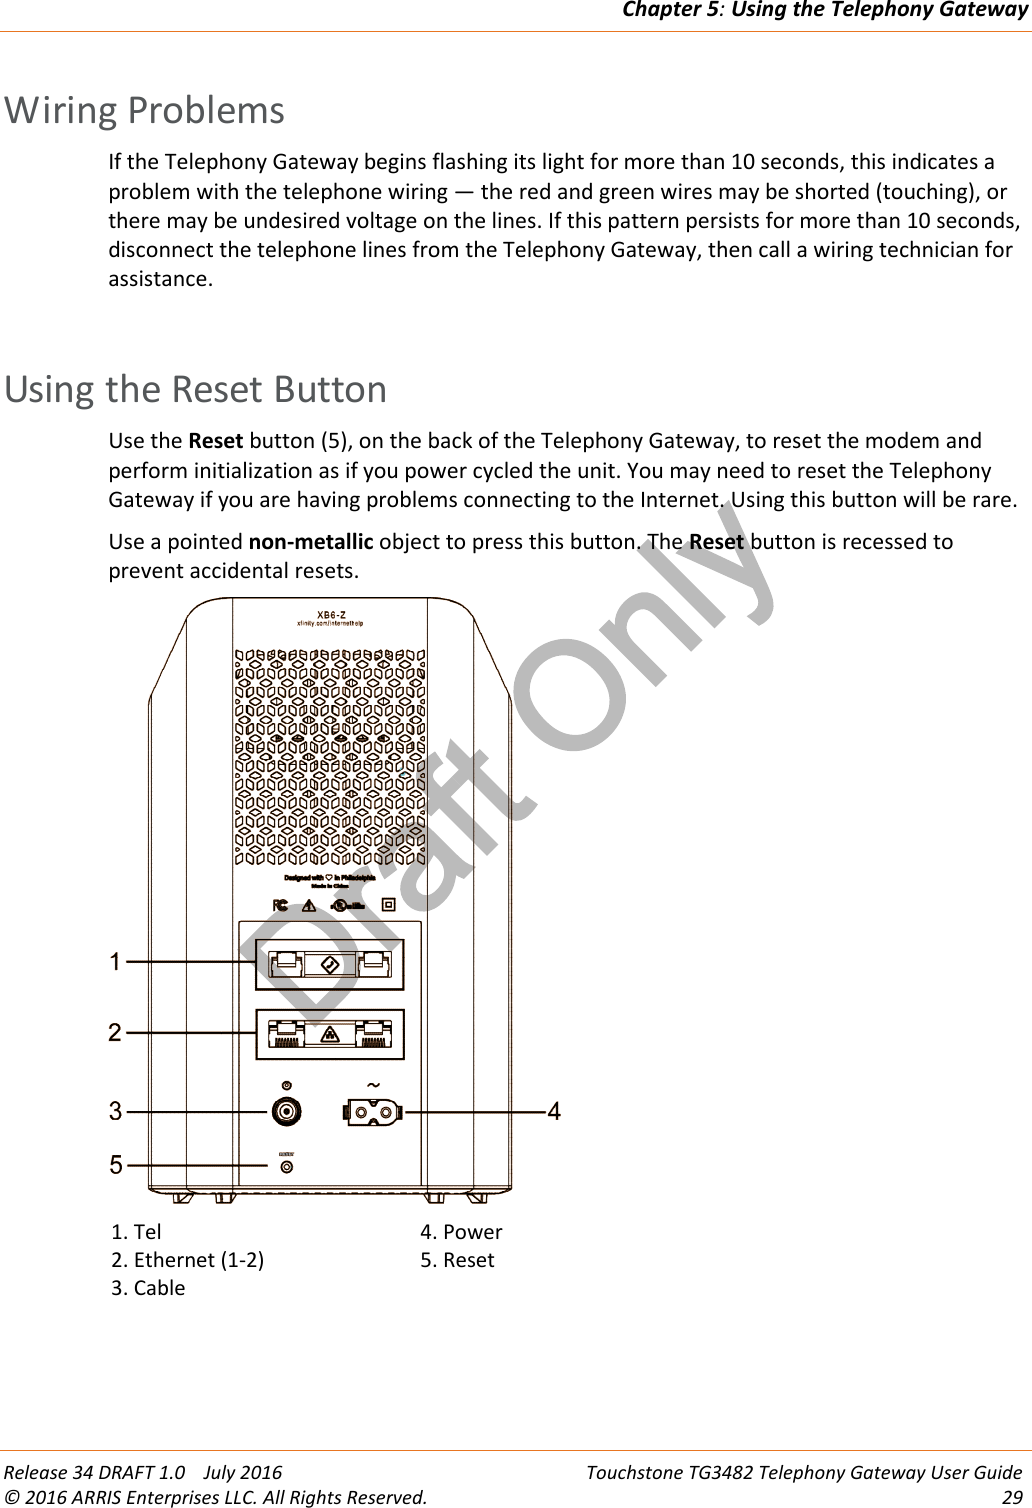 Draft OnlyChapter 5:Using the Telephony GatewayRelease 34 DRAFT 1.0 July 2016 Touchstone TG3482 Telephony Gateway User Guide© 2016 ARRIS Enterprises LLC. All Rights Reserved. 29Wiring ProblemsIf the Telephony Gateway begins flashing its light for more than 10 seconds, this indicates aproblem with the telephone wiring — the red and green wires may be shorted (touching), orthere may be undesired voltage on the lines. If this pattern persists for more than 10 seconds,disconnect the telephone lines from the Telephony Gateway, then call a wiring technician forassistance.Using the Reset ButtonUse the Reset button (5), on the back of the Telephony Gateway, to reset the modem andperform initialization as if you power cycled the unit. You may need to reset the TelephonyGateway if you are having problems connecting to the Internet. Using this button will be rare.Use a pointed non-metallic object to press this button. The Reset button is recessed toprevent accidental resets.1. Tel2. Ethernet (1-2)3. Cable4. Power5. Reset